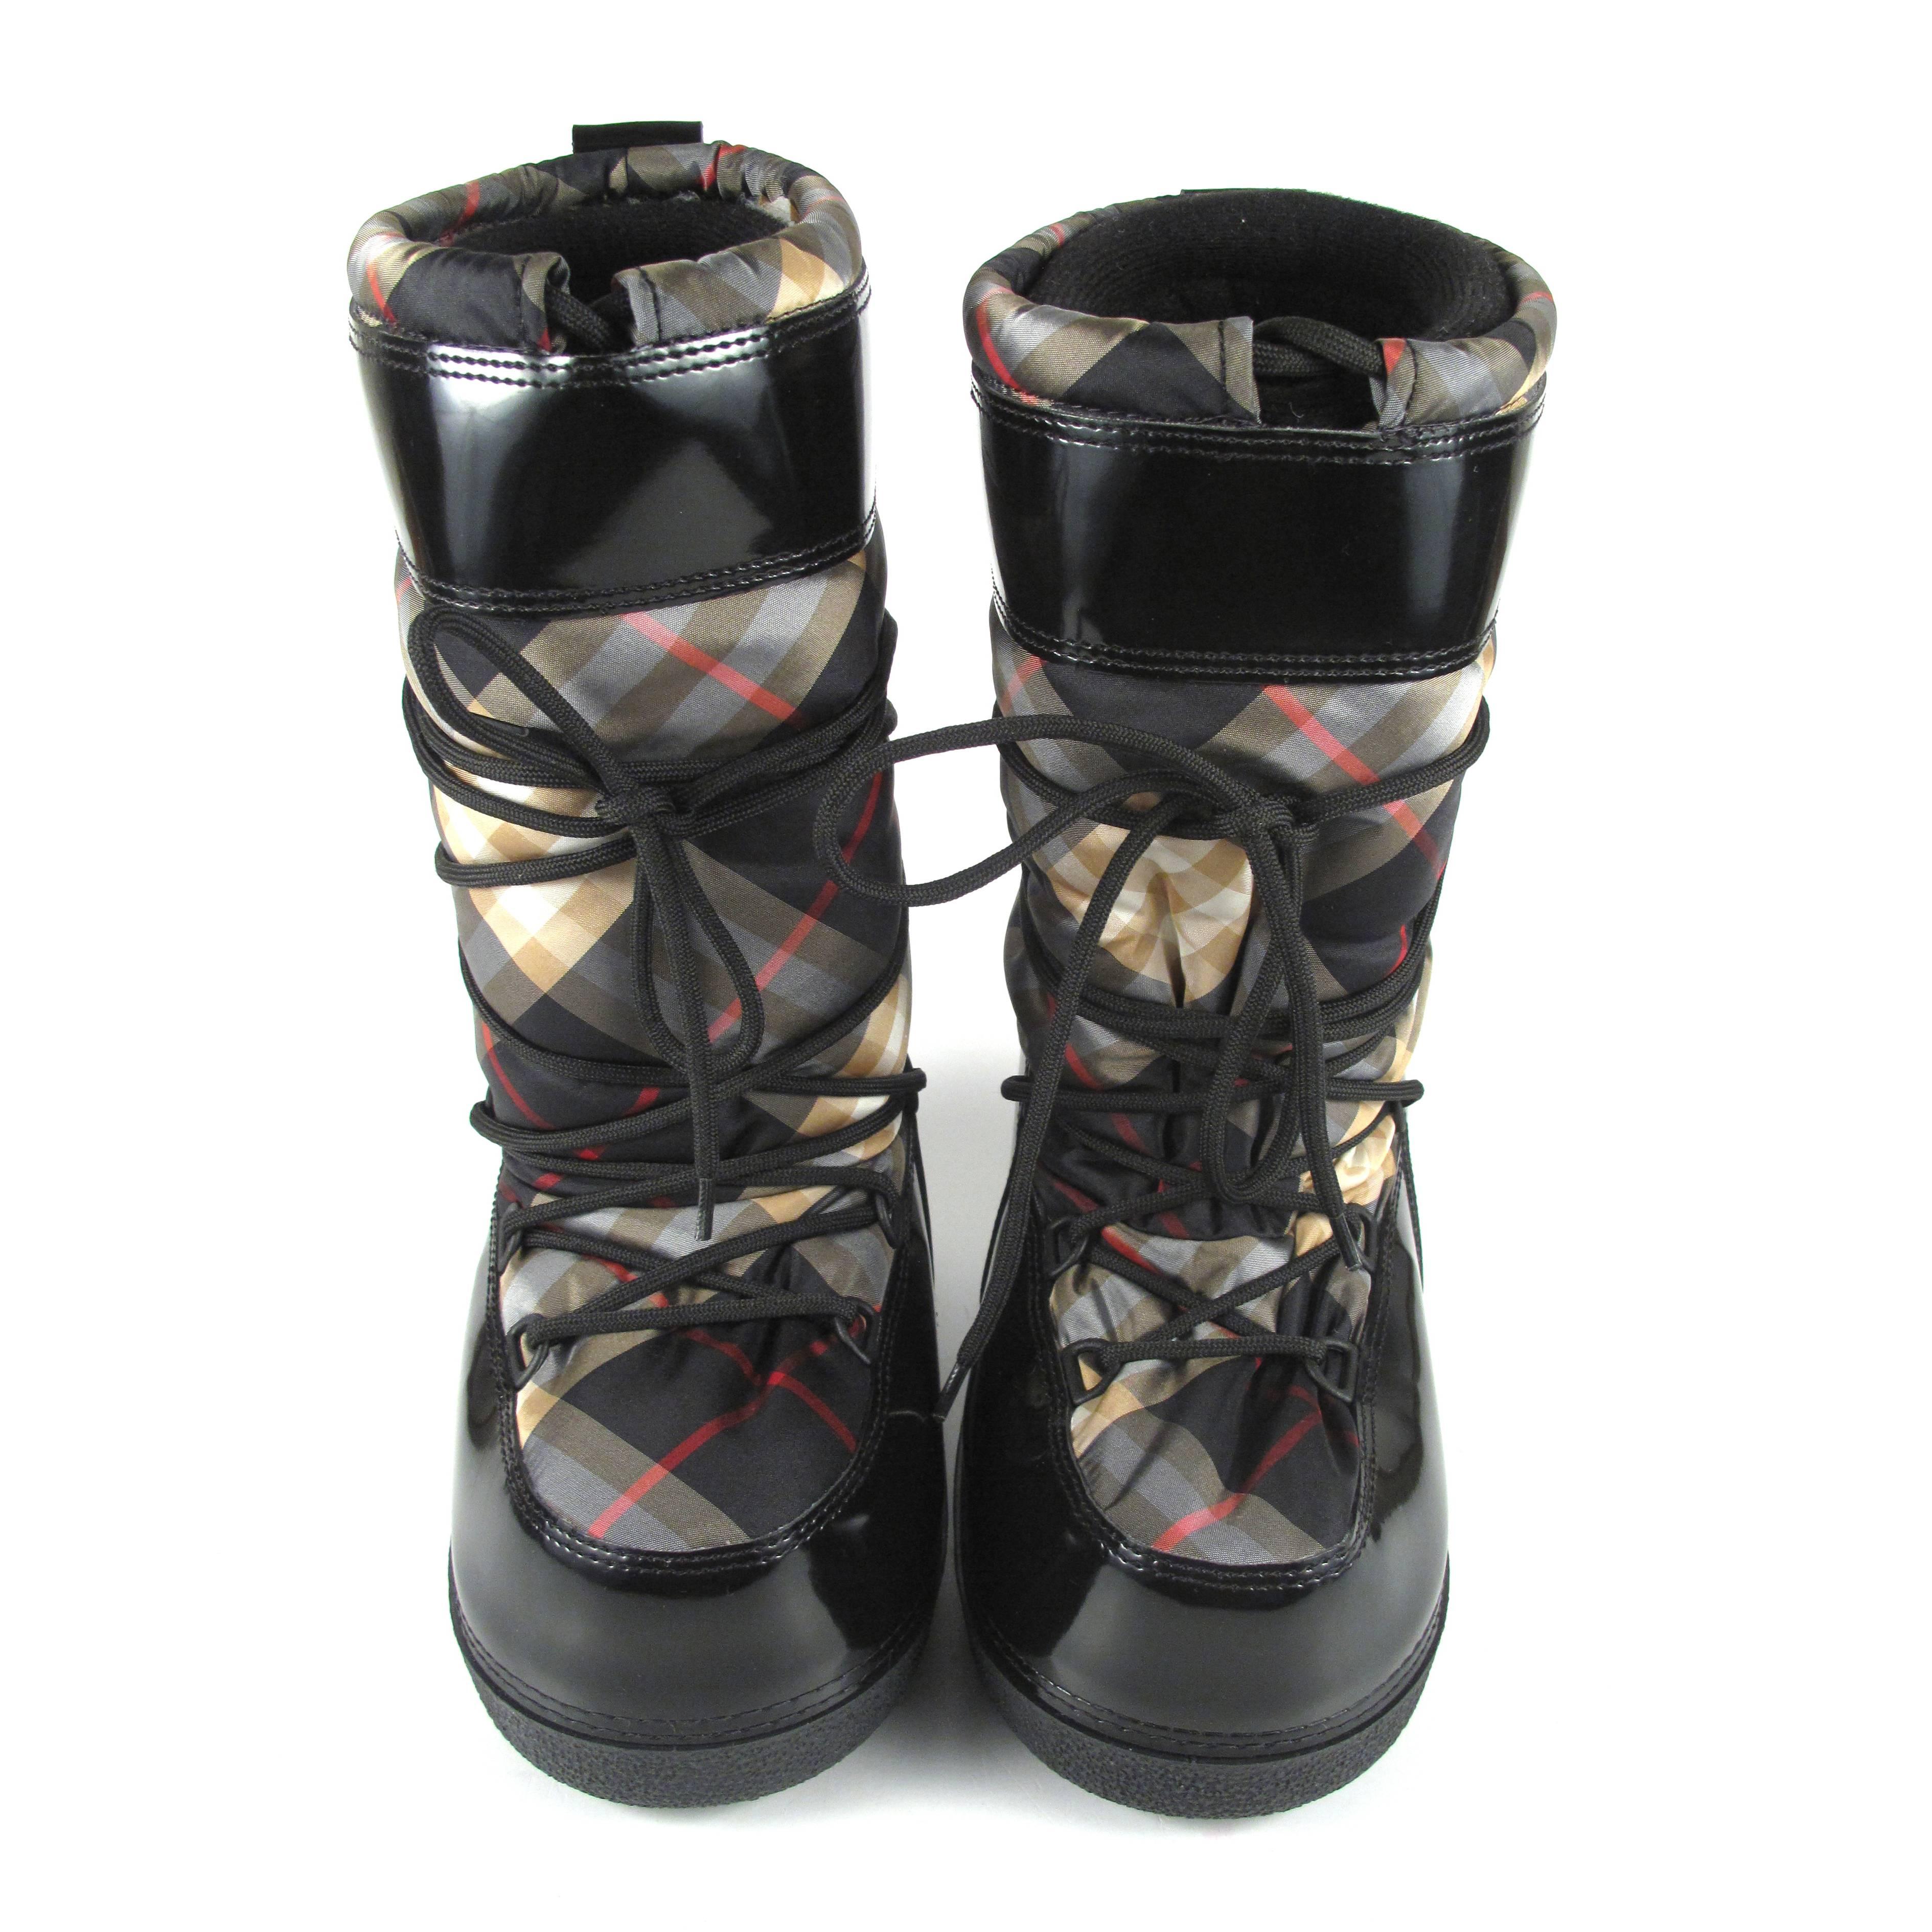 BRAND NEW:

Burberry - Snow Boots

Size: 37 - US 7

Color: Black / Multi

Material: Leather

------------------------------------------------------------

Details:

- signature plaid pattern

- lace up closure

- includes box

-